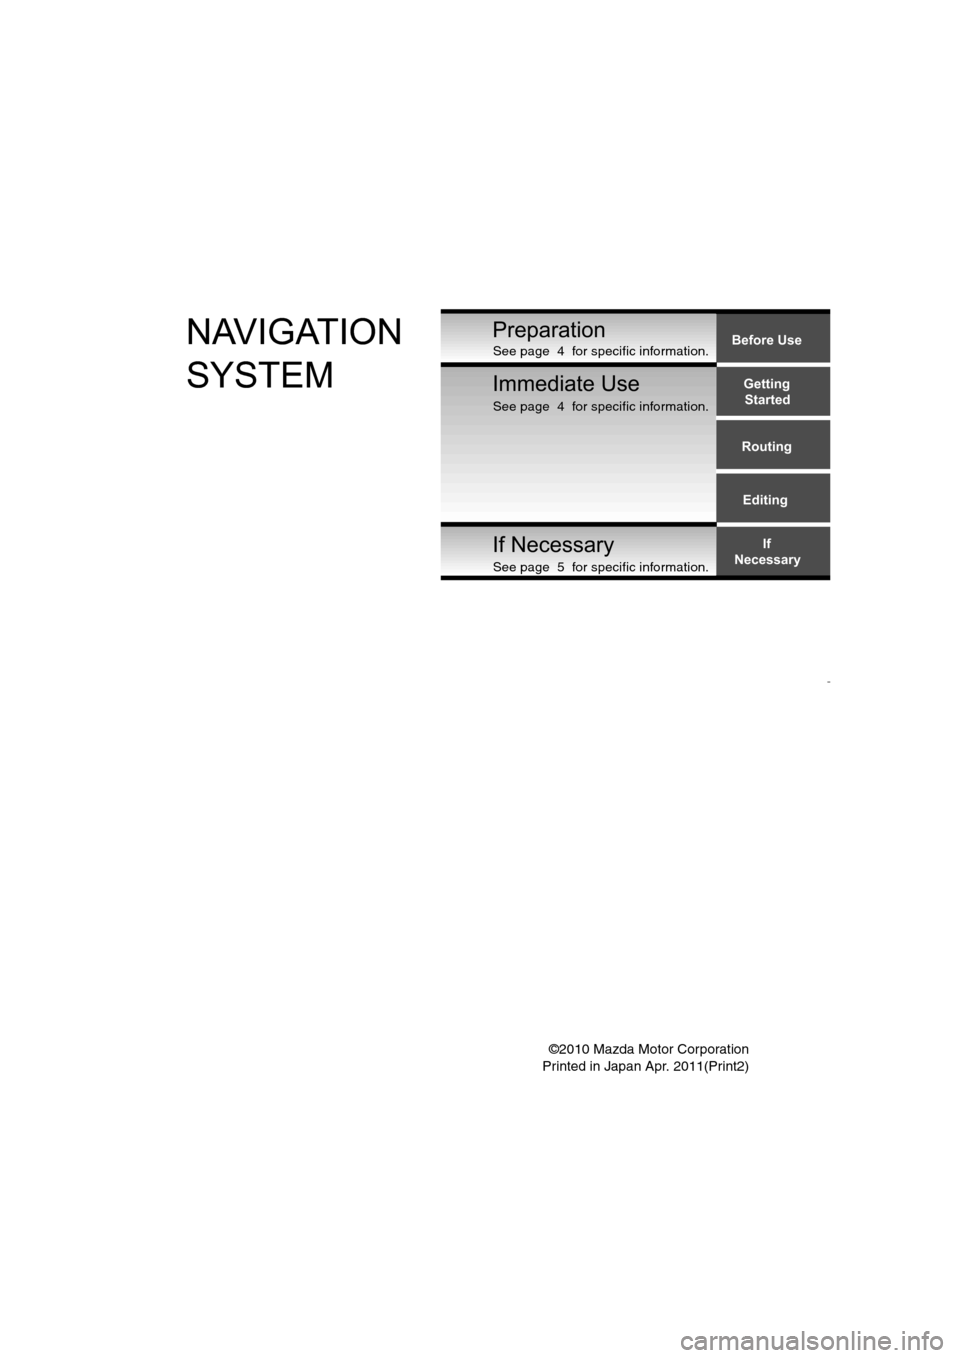 MAZDA MODEL CX-7 2011  Navigation Manual (in English) ©2010 Mazda Motor Corporation
Printed in Japan Apr. 2011(Print2)
Before Use
GettingStarted
Routing
Editing If
NecessaryPreparationNAVIGATION 
SYSTEM
Immediate Use
If Necessary
See page  5  for specif